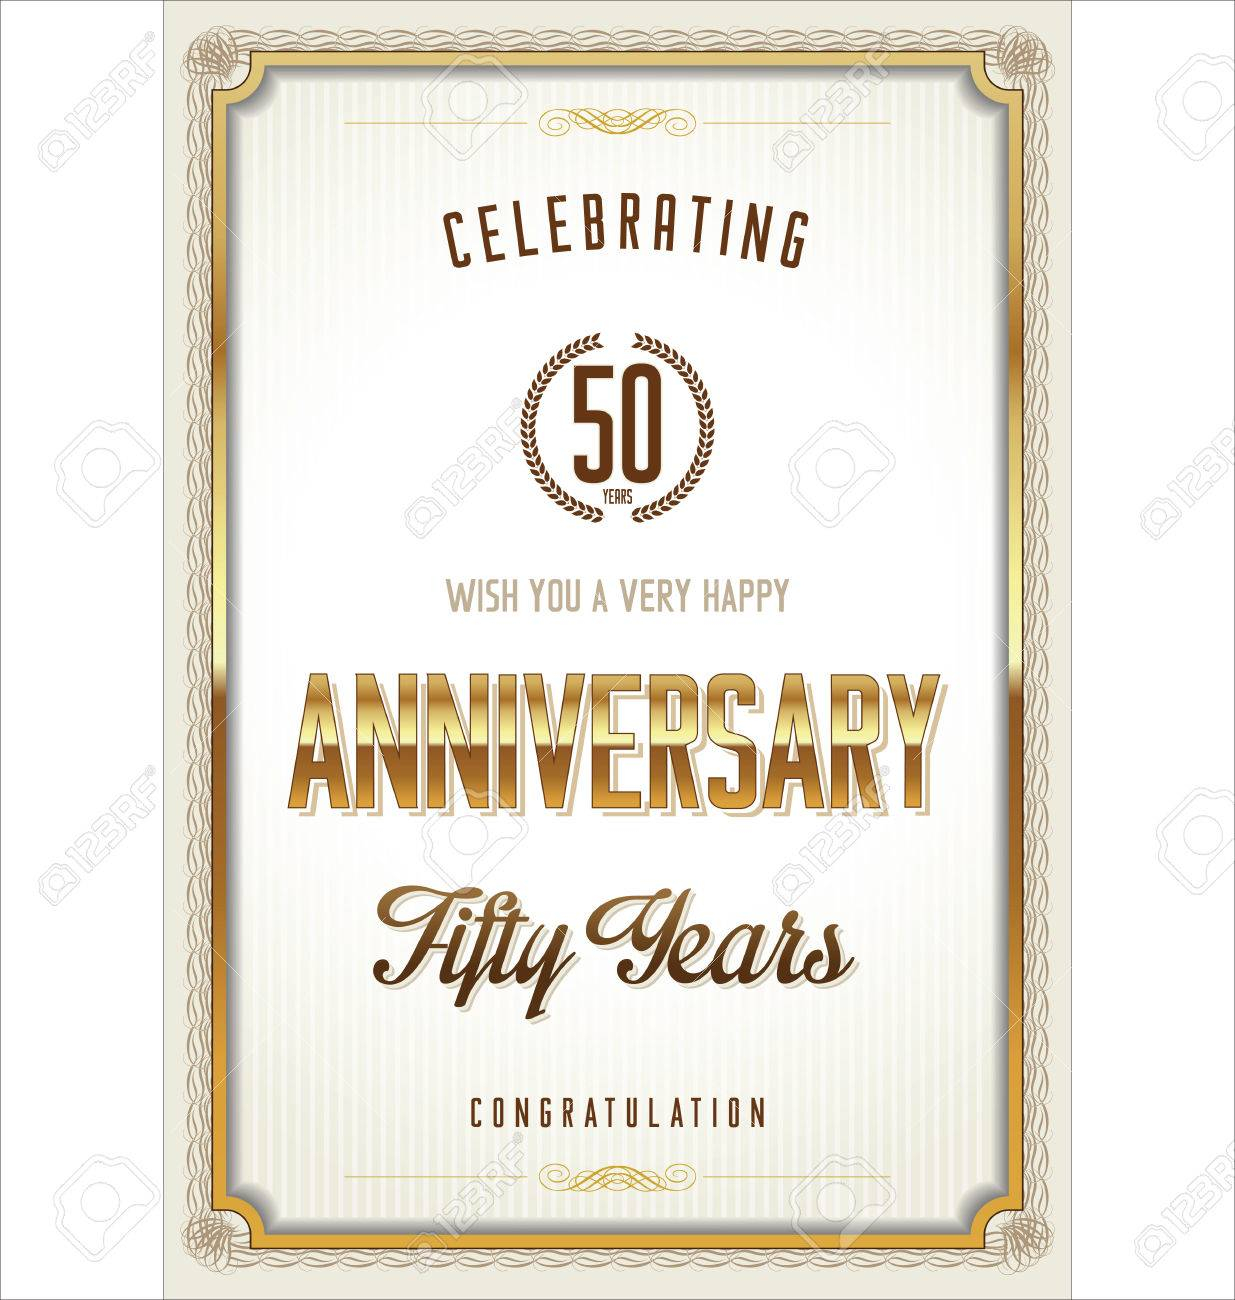 Anniversary Certificate Template Royalty Free SVG, Cliparts  Regarding Anniversary Certificate Template Free